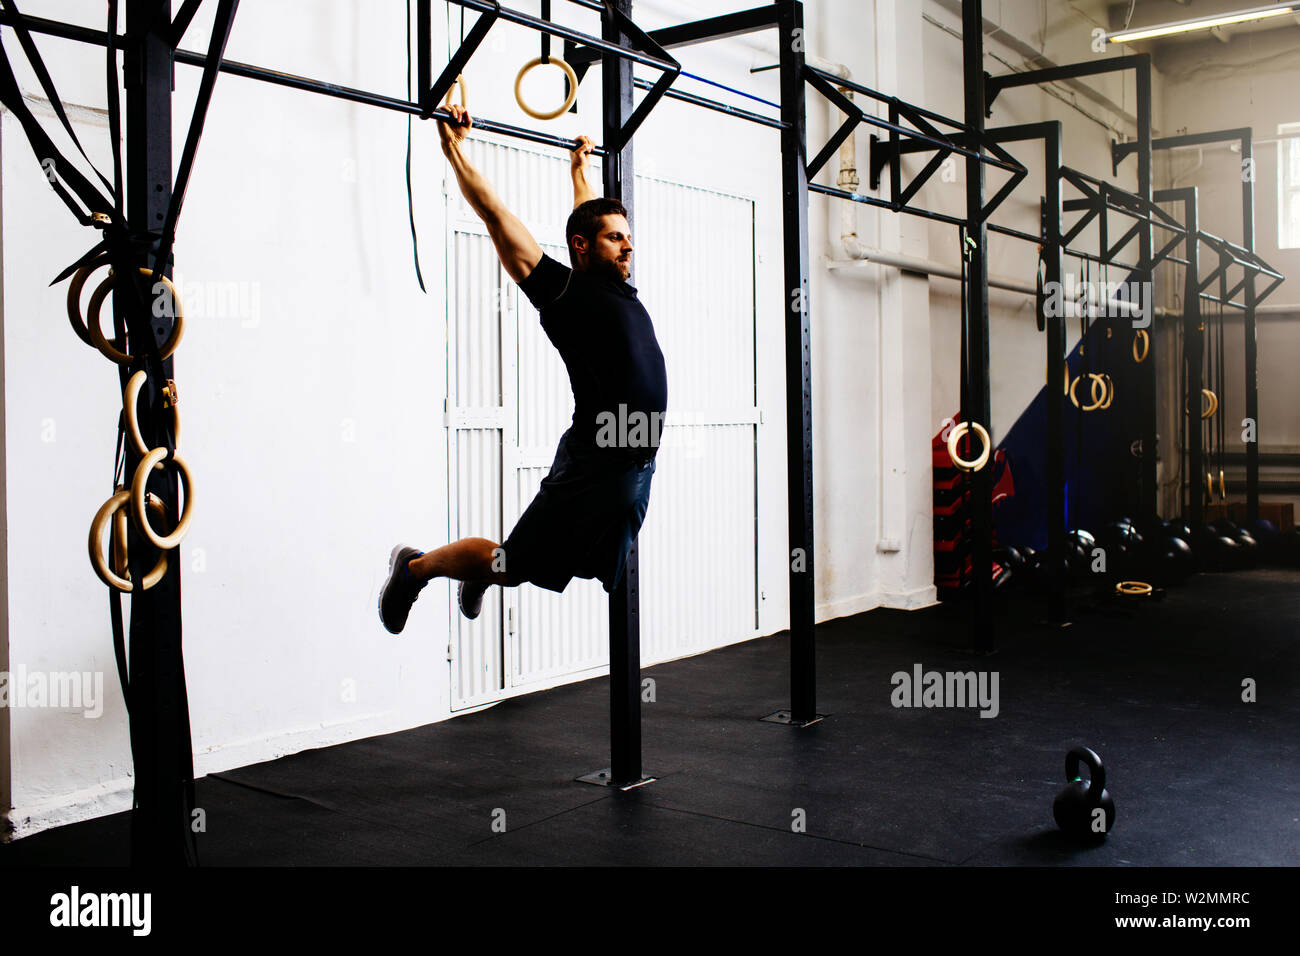 Young man doing kipping pull-ups exercise at gym Stock Photo